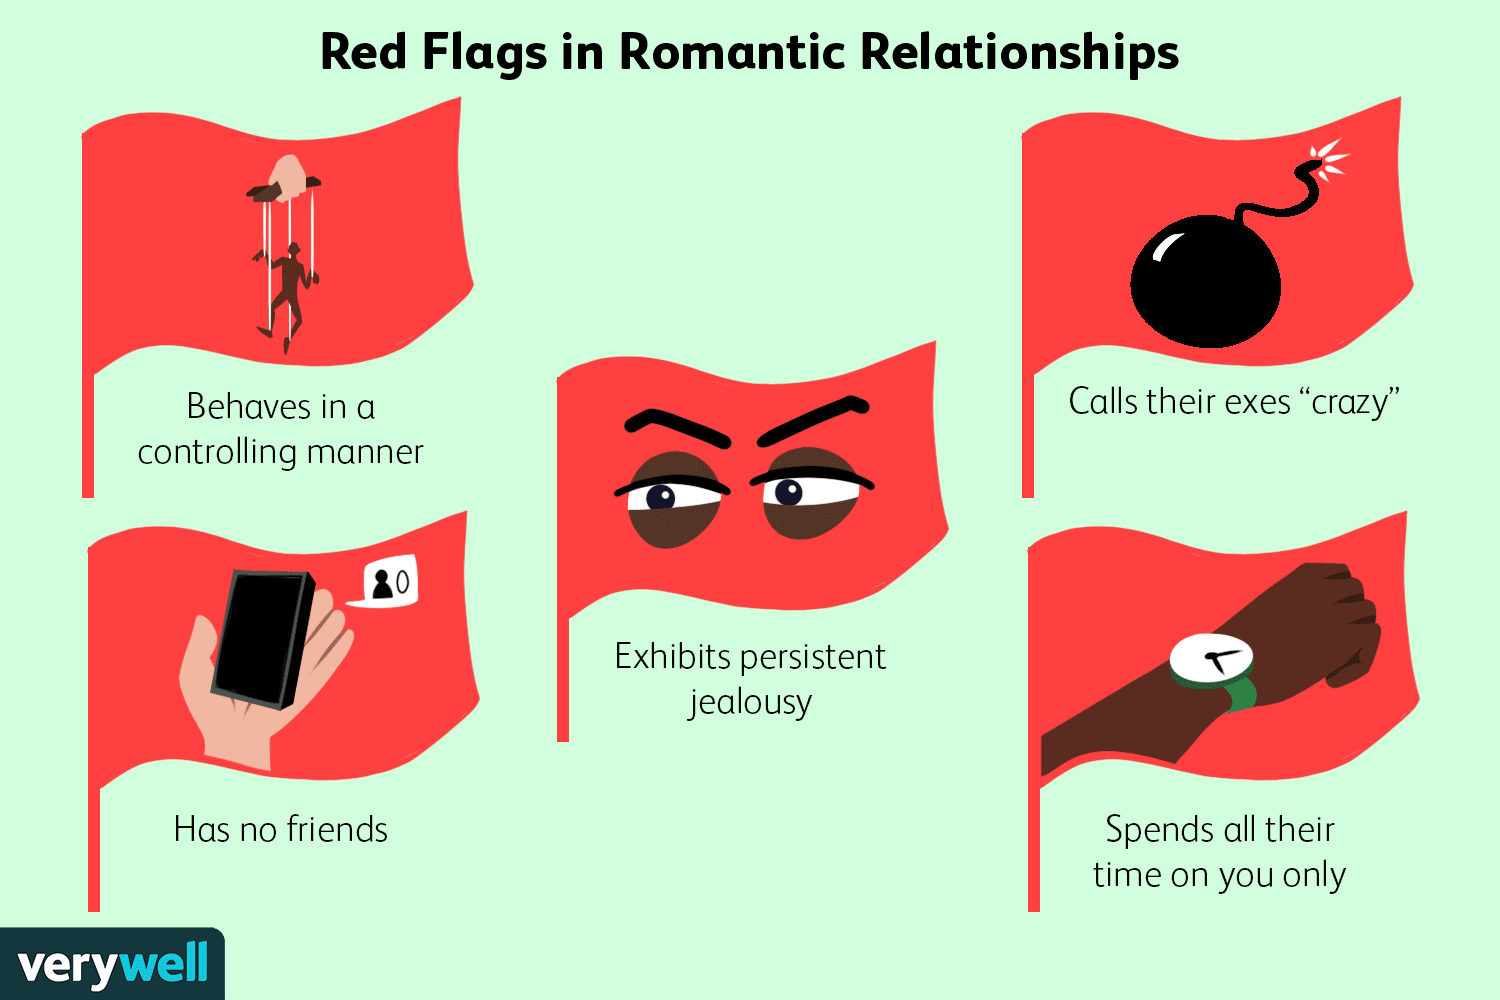 10-red-flags-in-relationships-5194592-final-95724a6fa0094612b5b91caa62c8dba7.gif